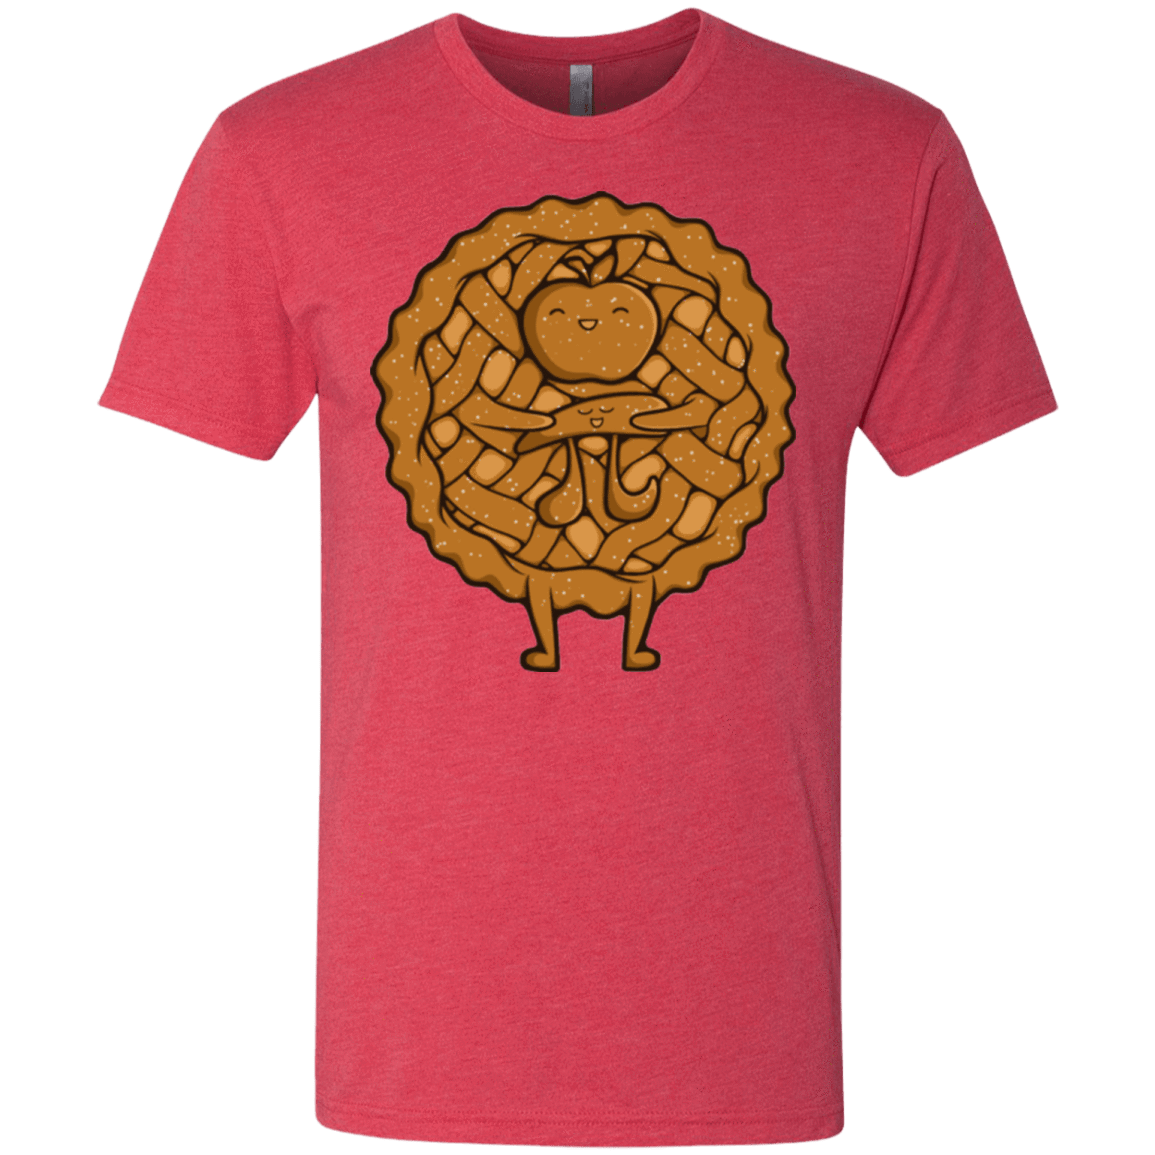 T-Shirts Vintage Red / Small Apple Pie Men's Triblend T-Shirt